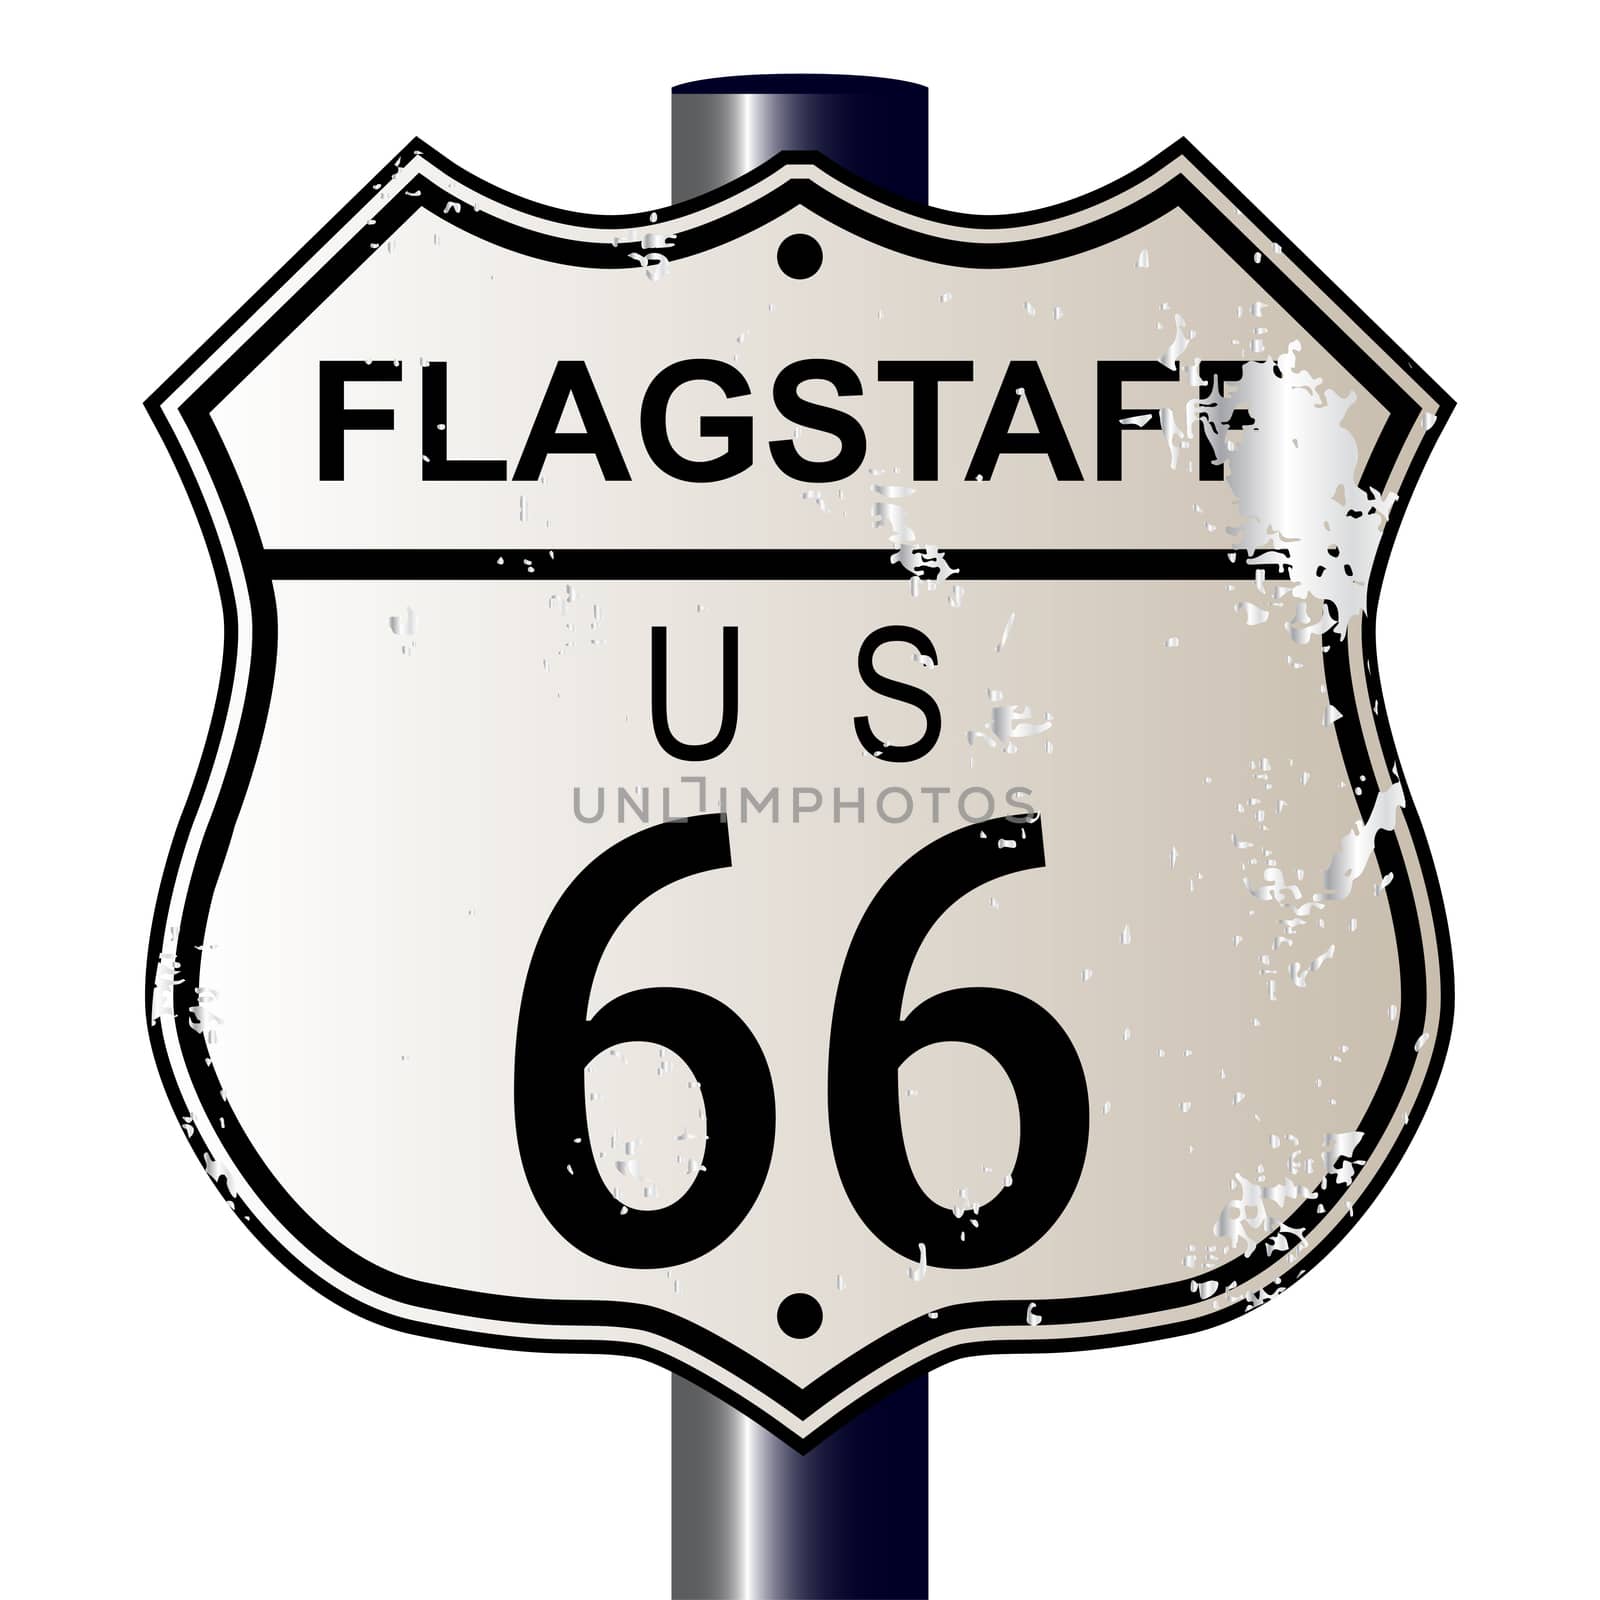 Flagstaff Route 66 traffic sign over a white background and the legend ROUTE US 66